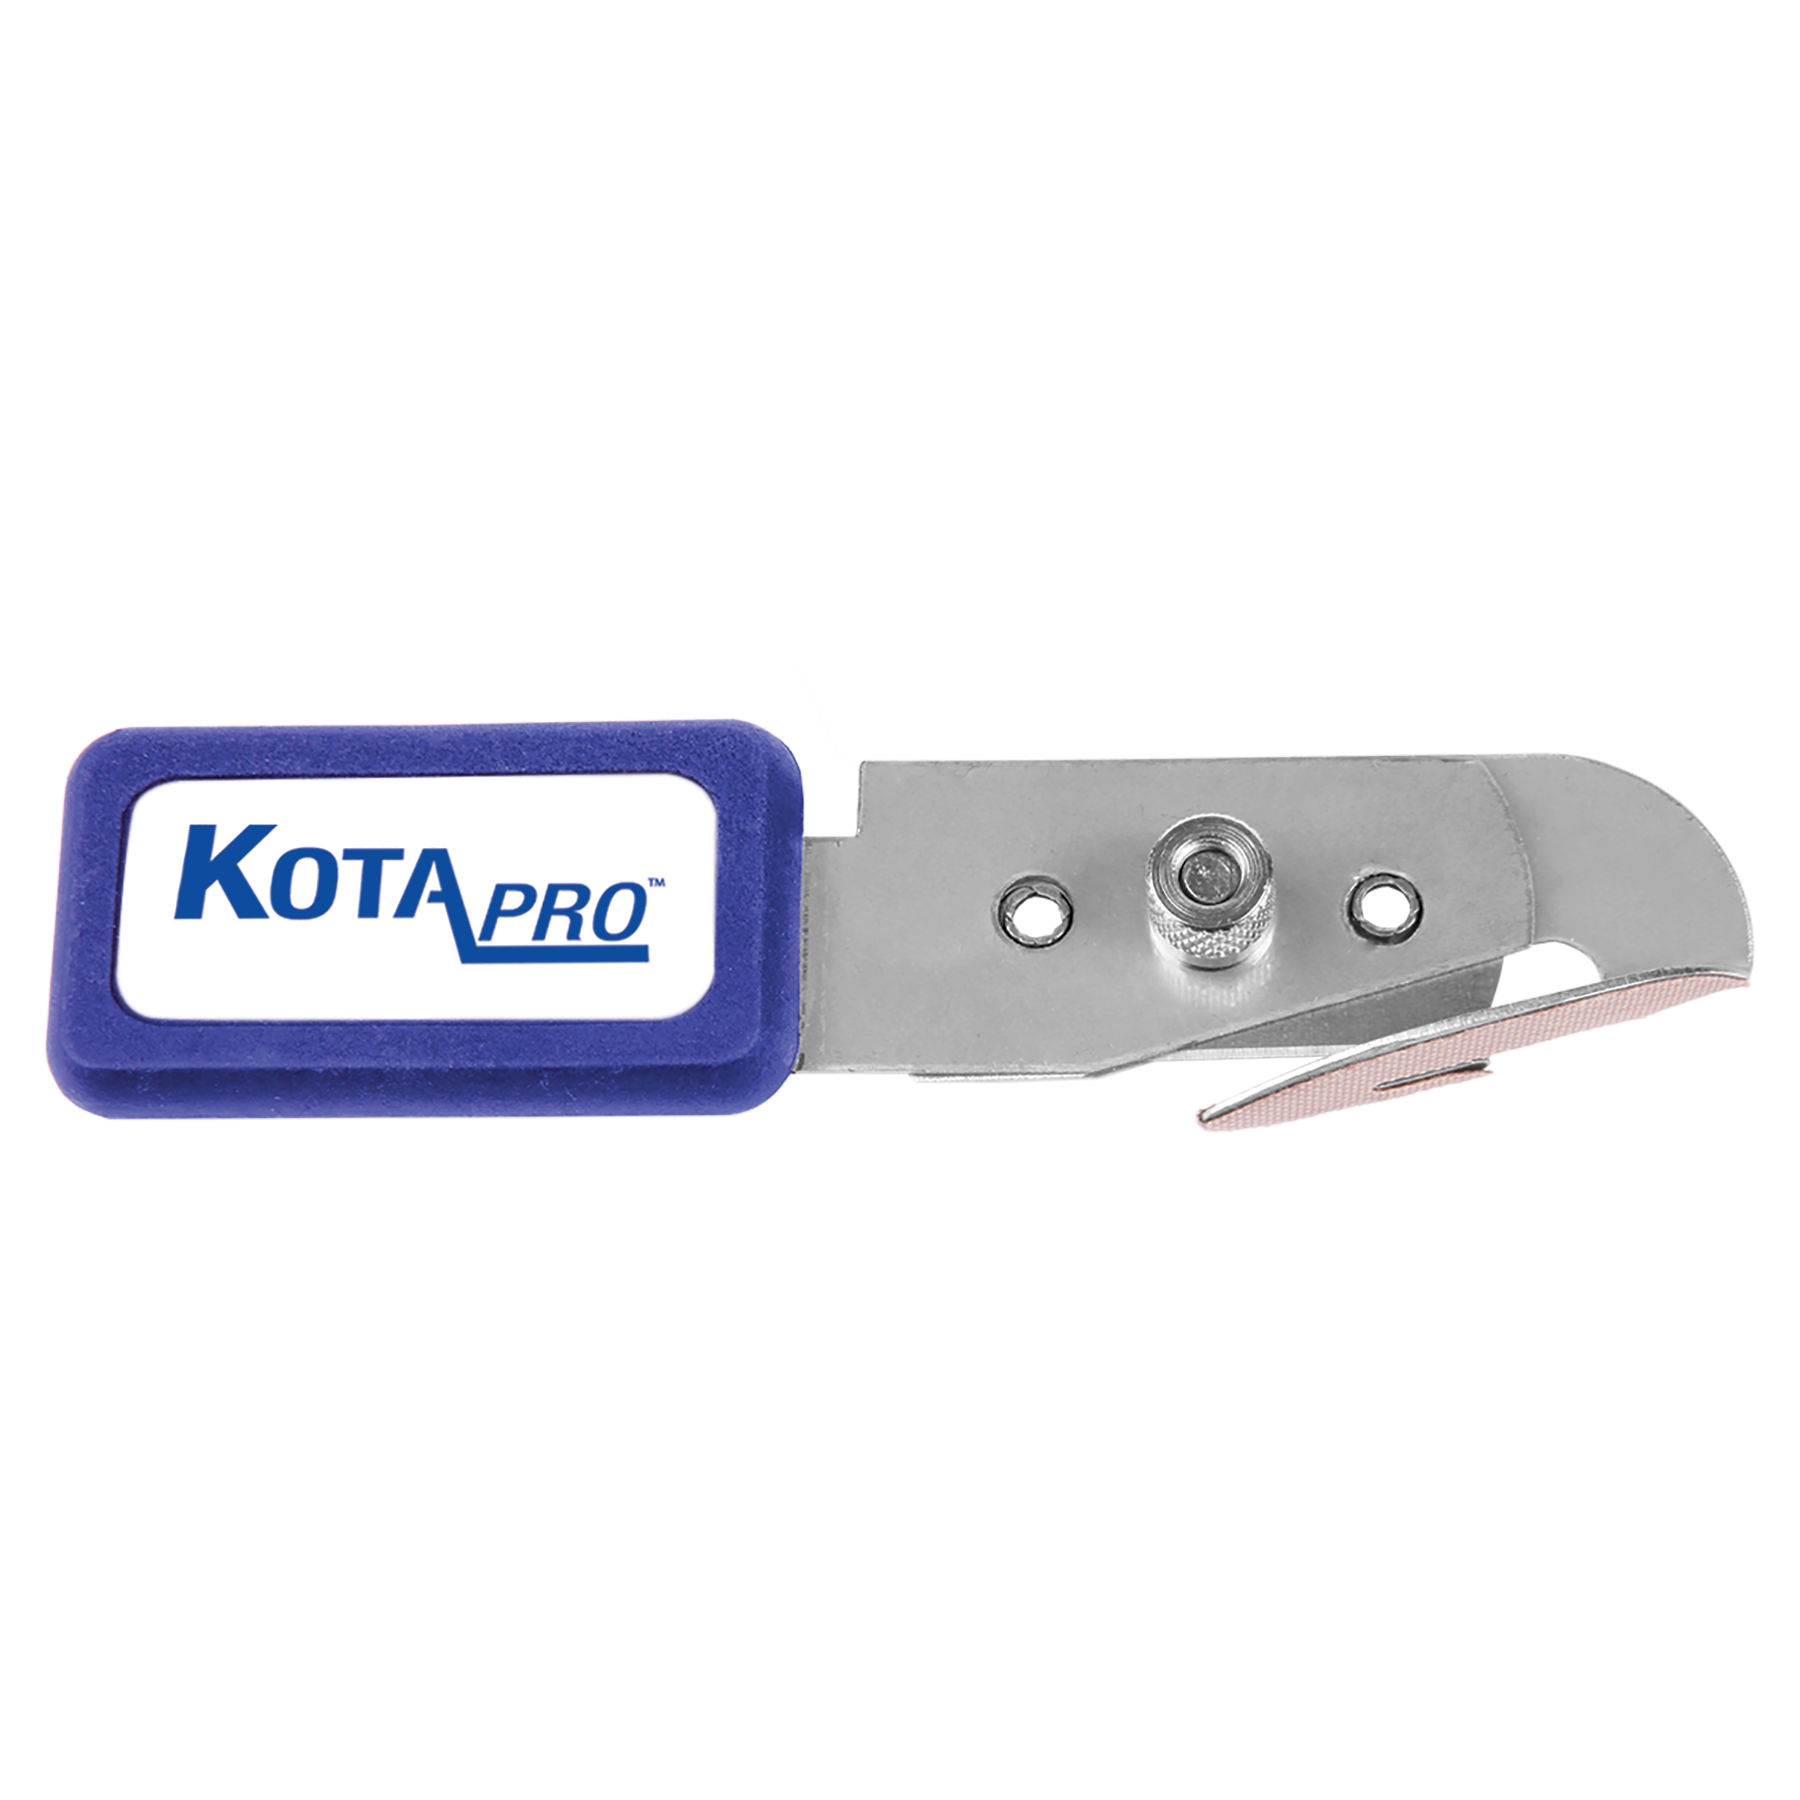 How to Use Kota Pro Liner Cutters 